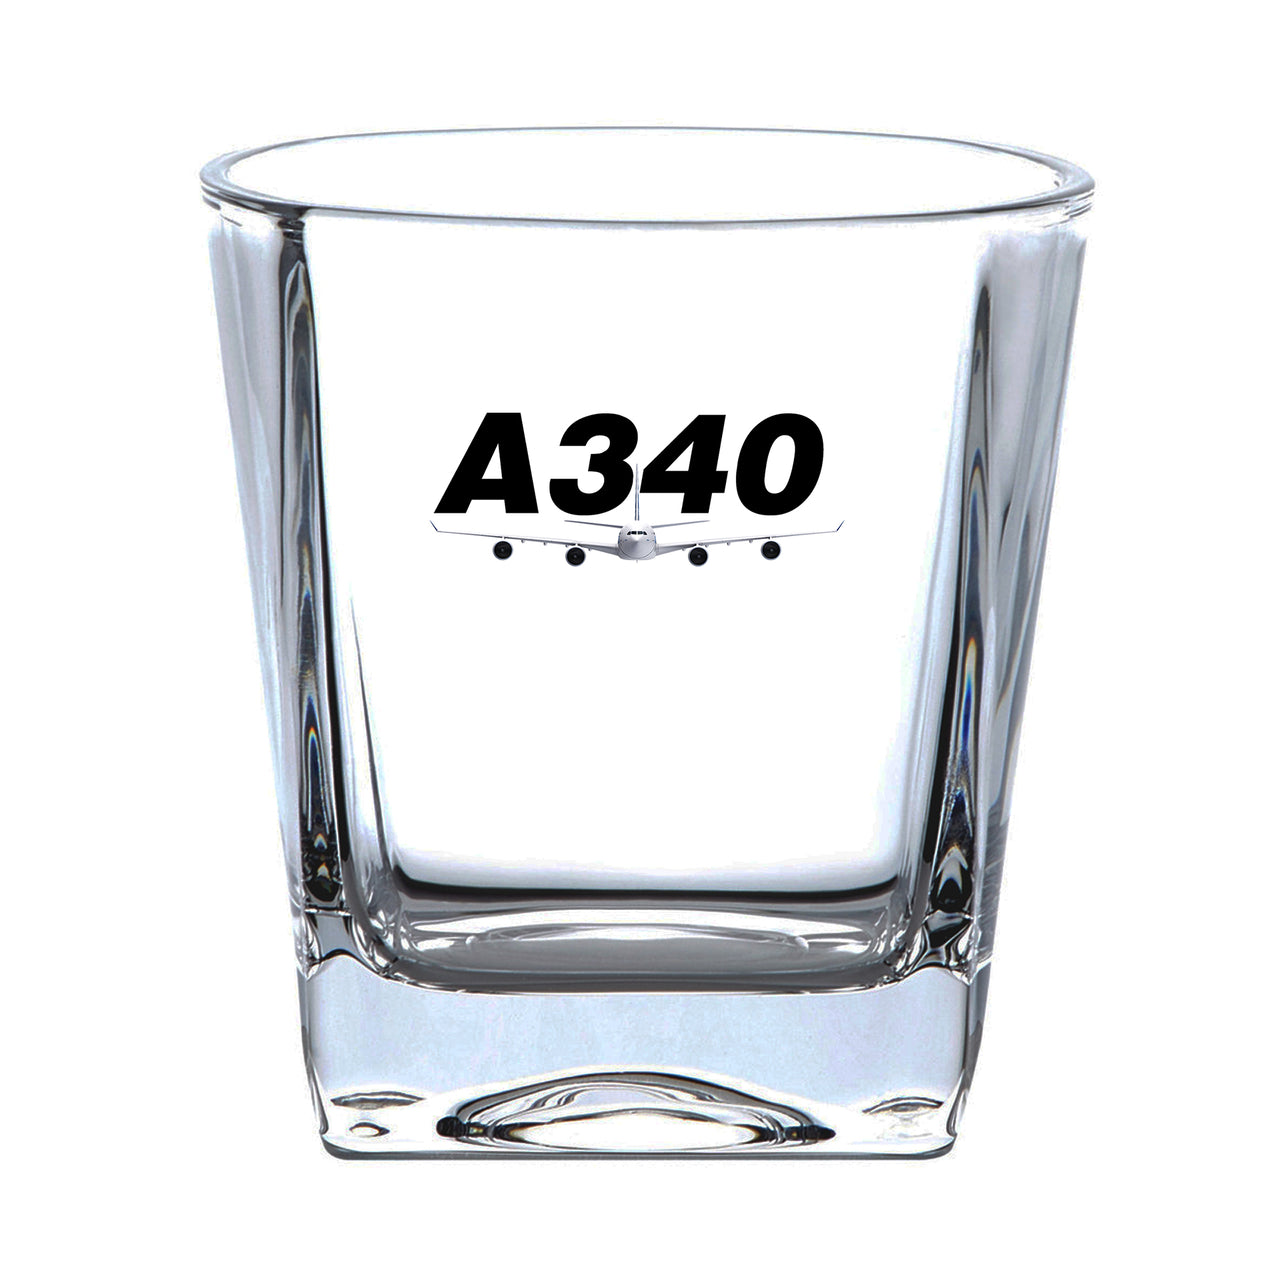 Super Airbus A340 Designed Whiskey Glass